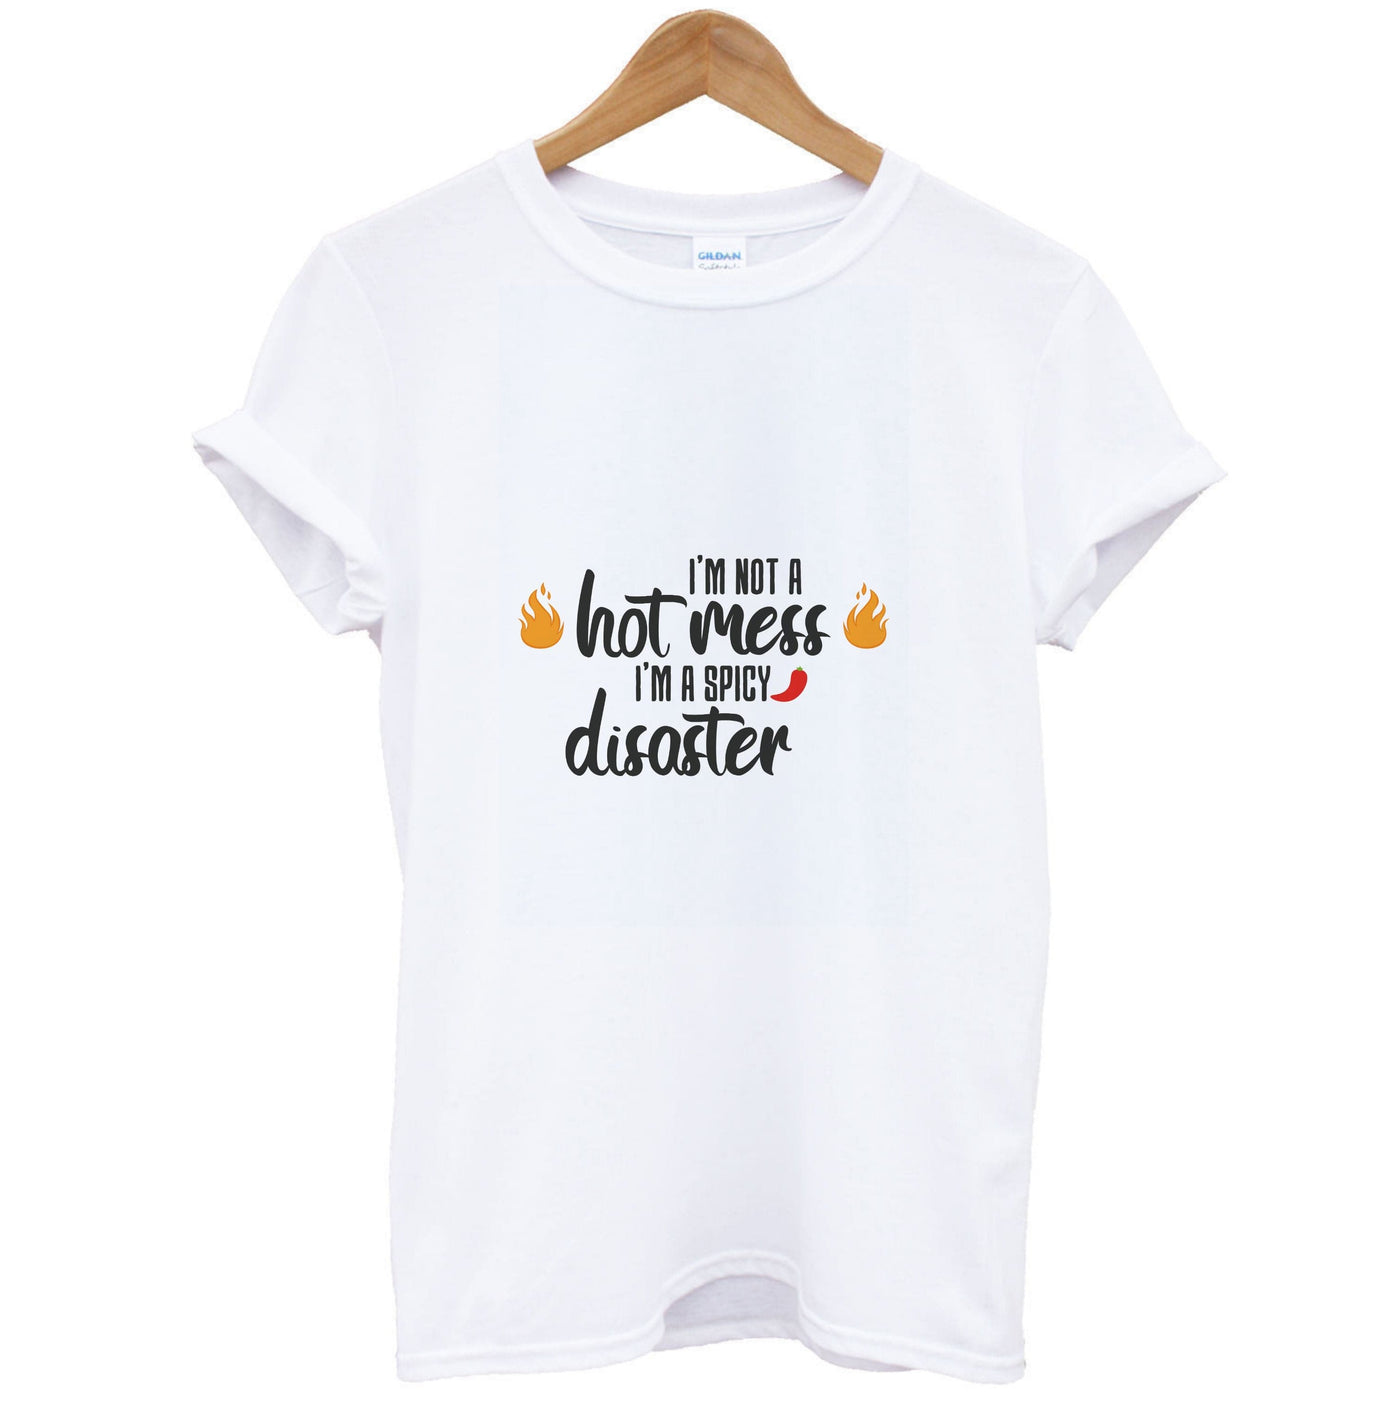 I'm A Spicy Disaster - Funny Quotes T-Shirt